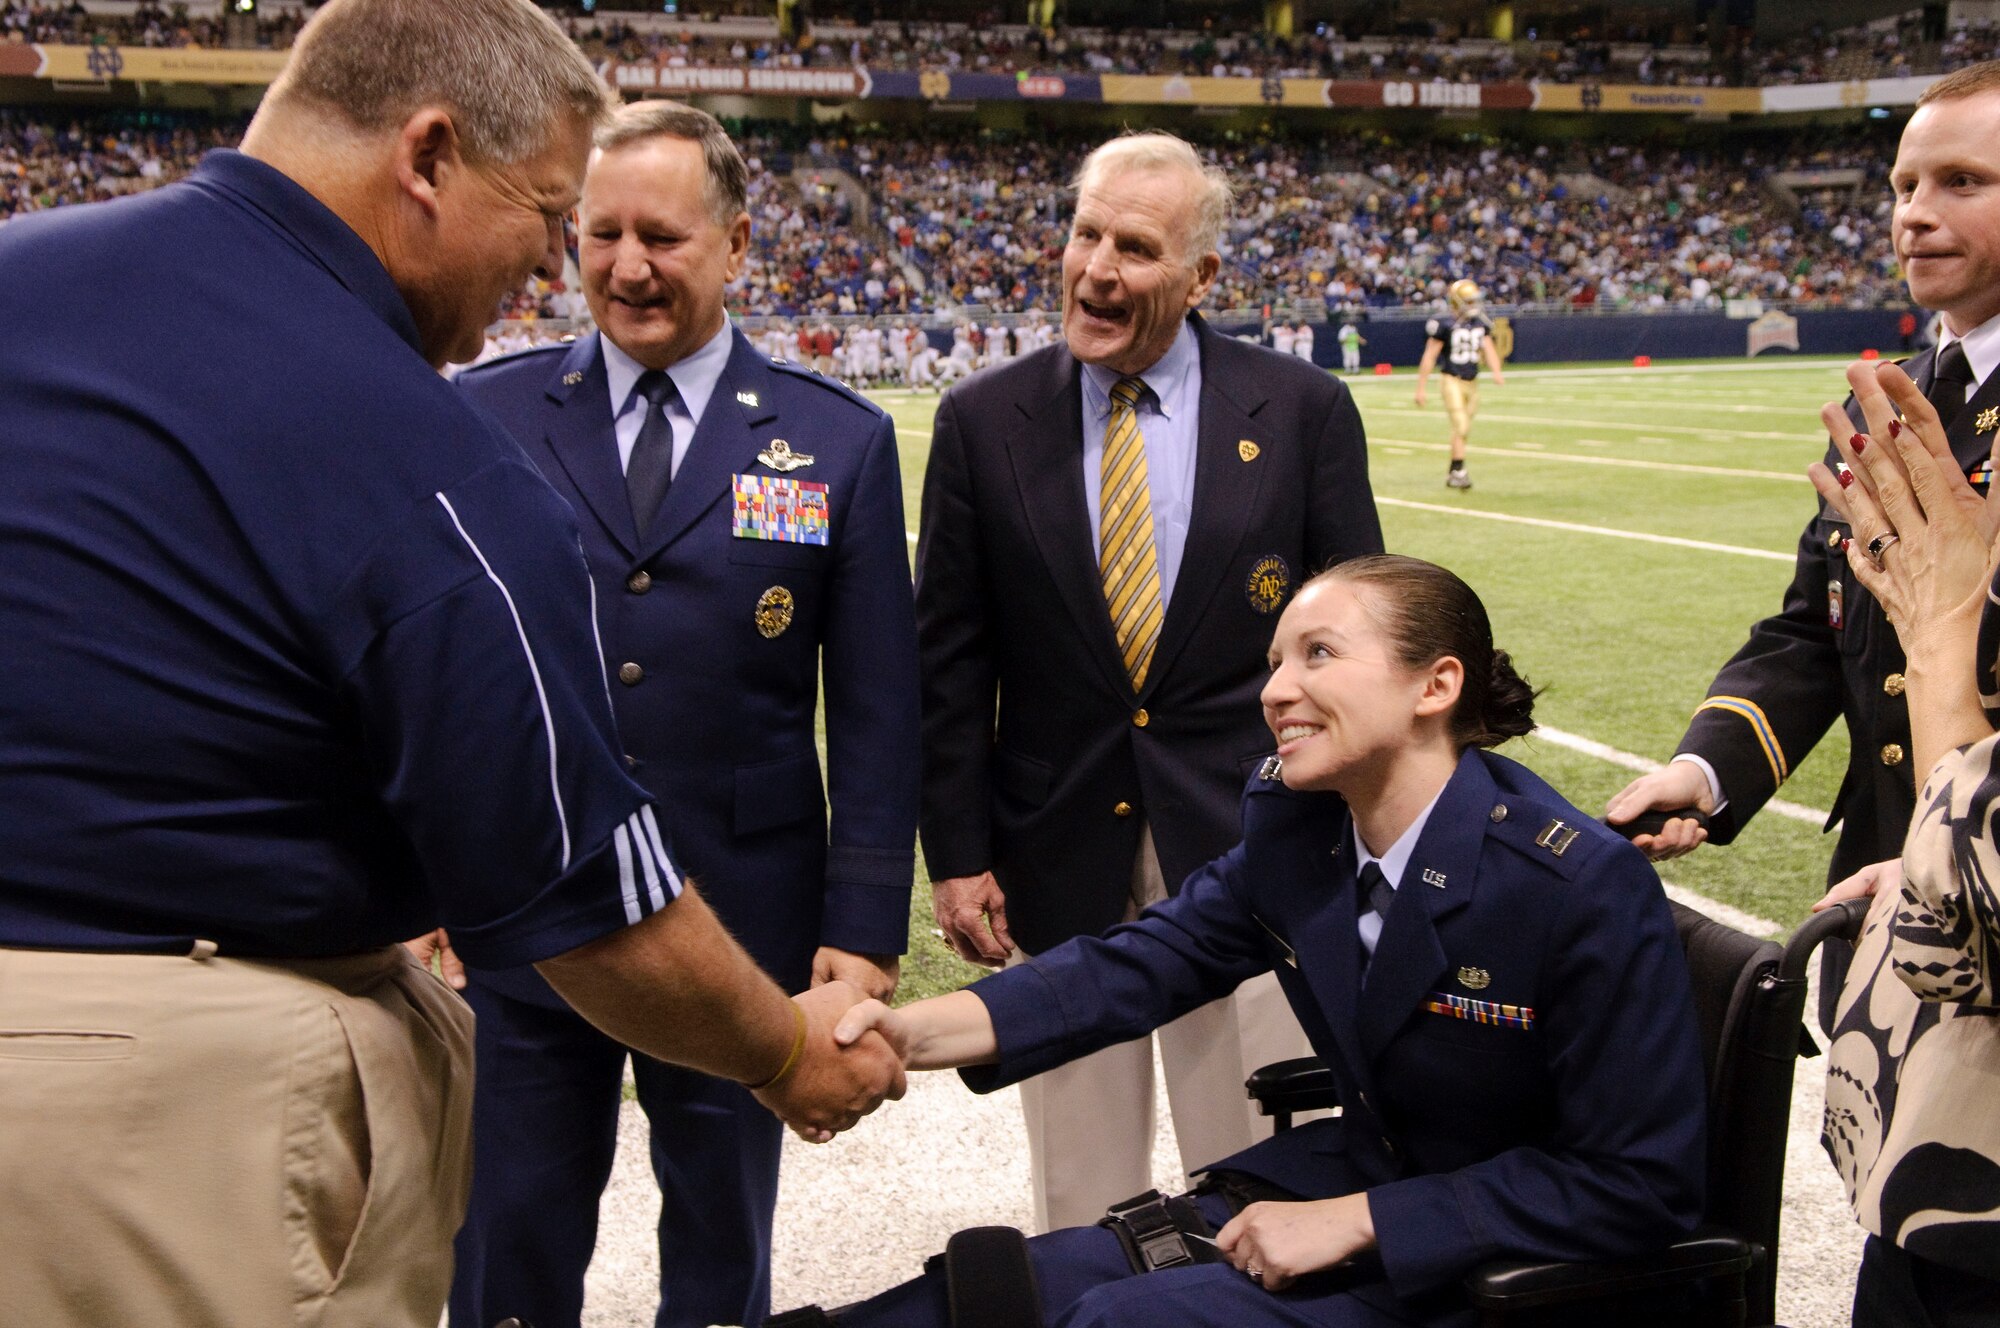 University of Notre Dame head football coach Charlie Weis greets Capt. Wendy Kosek, a member of the JAG corp currently undergoing physical therapy at Brook Army medical Center for wounds sustained in Iraq, during a ceremony honoring alumni at half-time of the Notre Dame, Washington State football game held at the Alamo Dome in San Antonio, Texas. (U.S. Air Force by Steve Thurow)